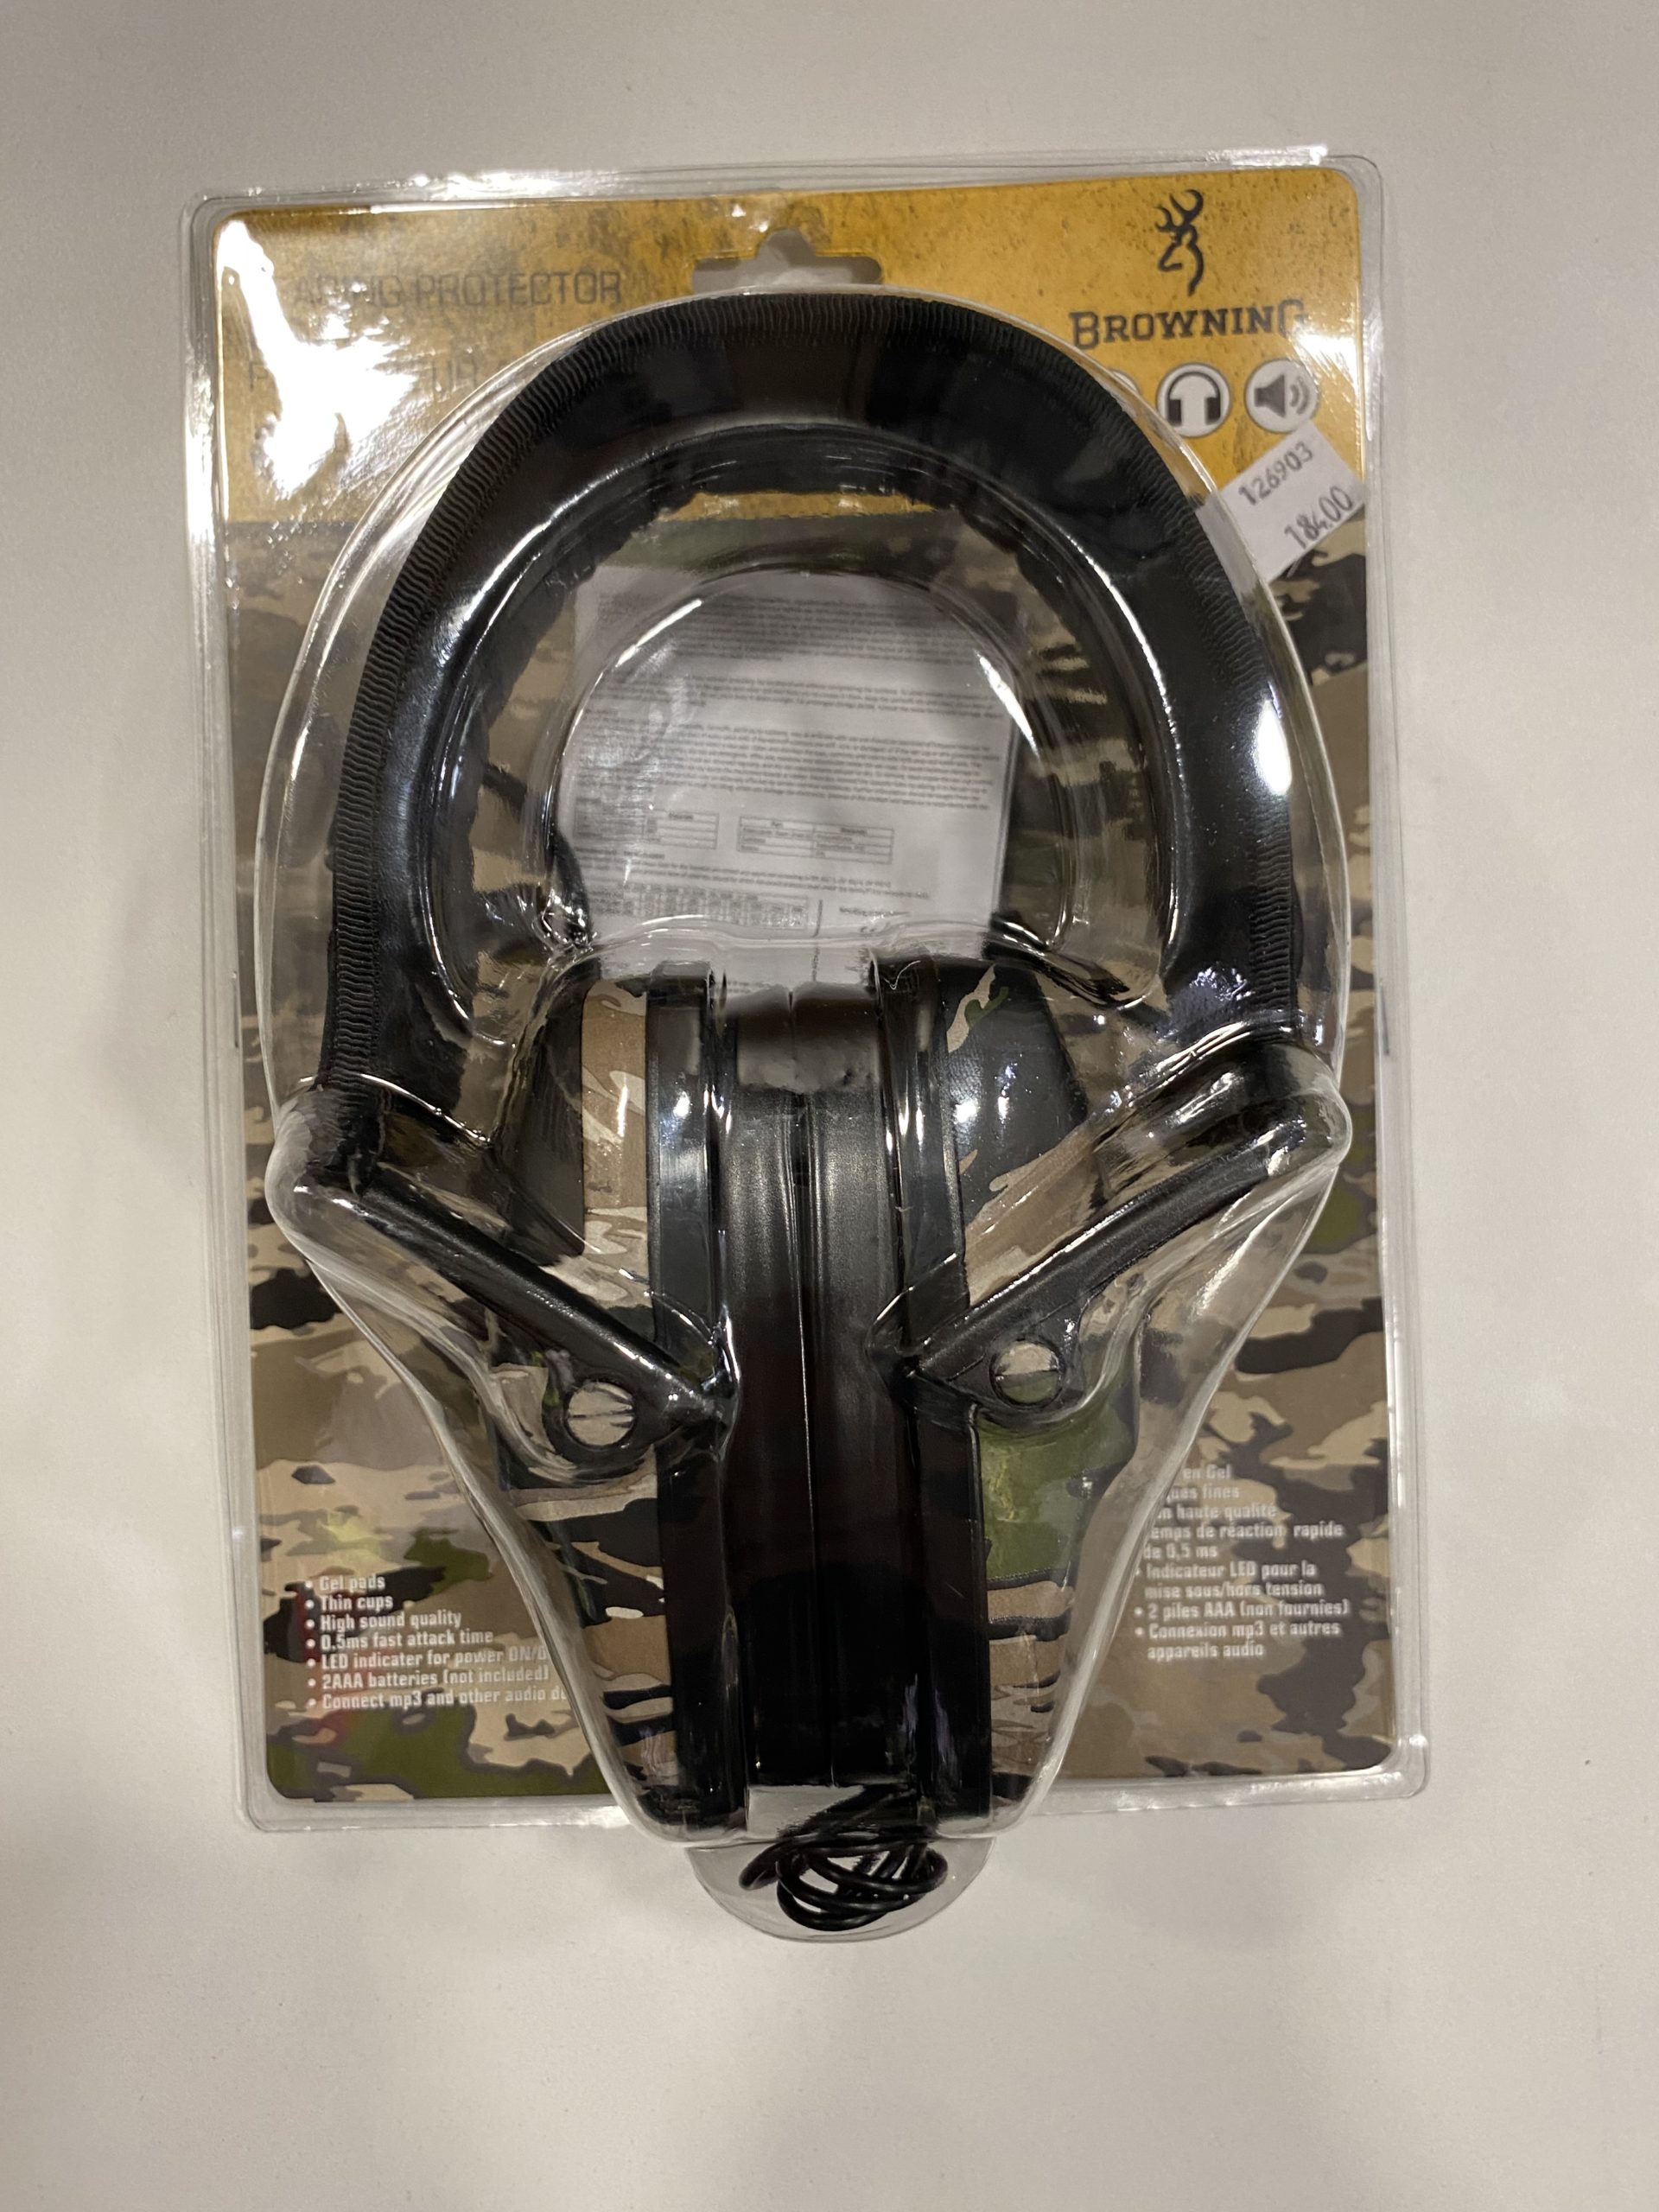 Casque de protection auditive BDM BLUETOOTH olive Browning - 19806